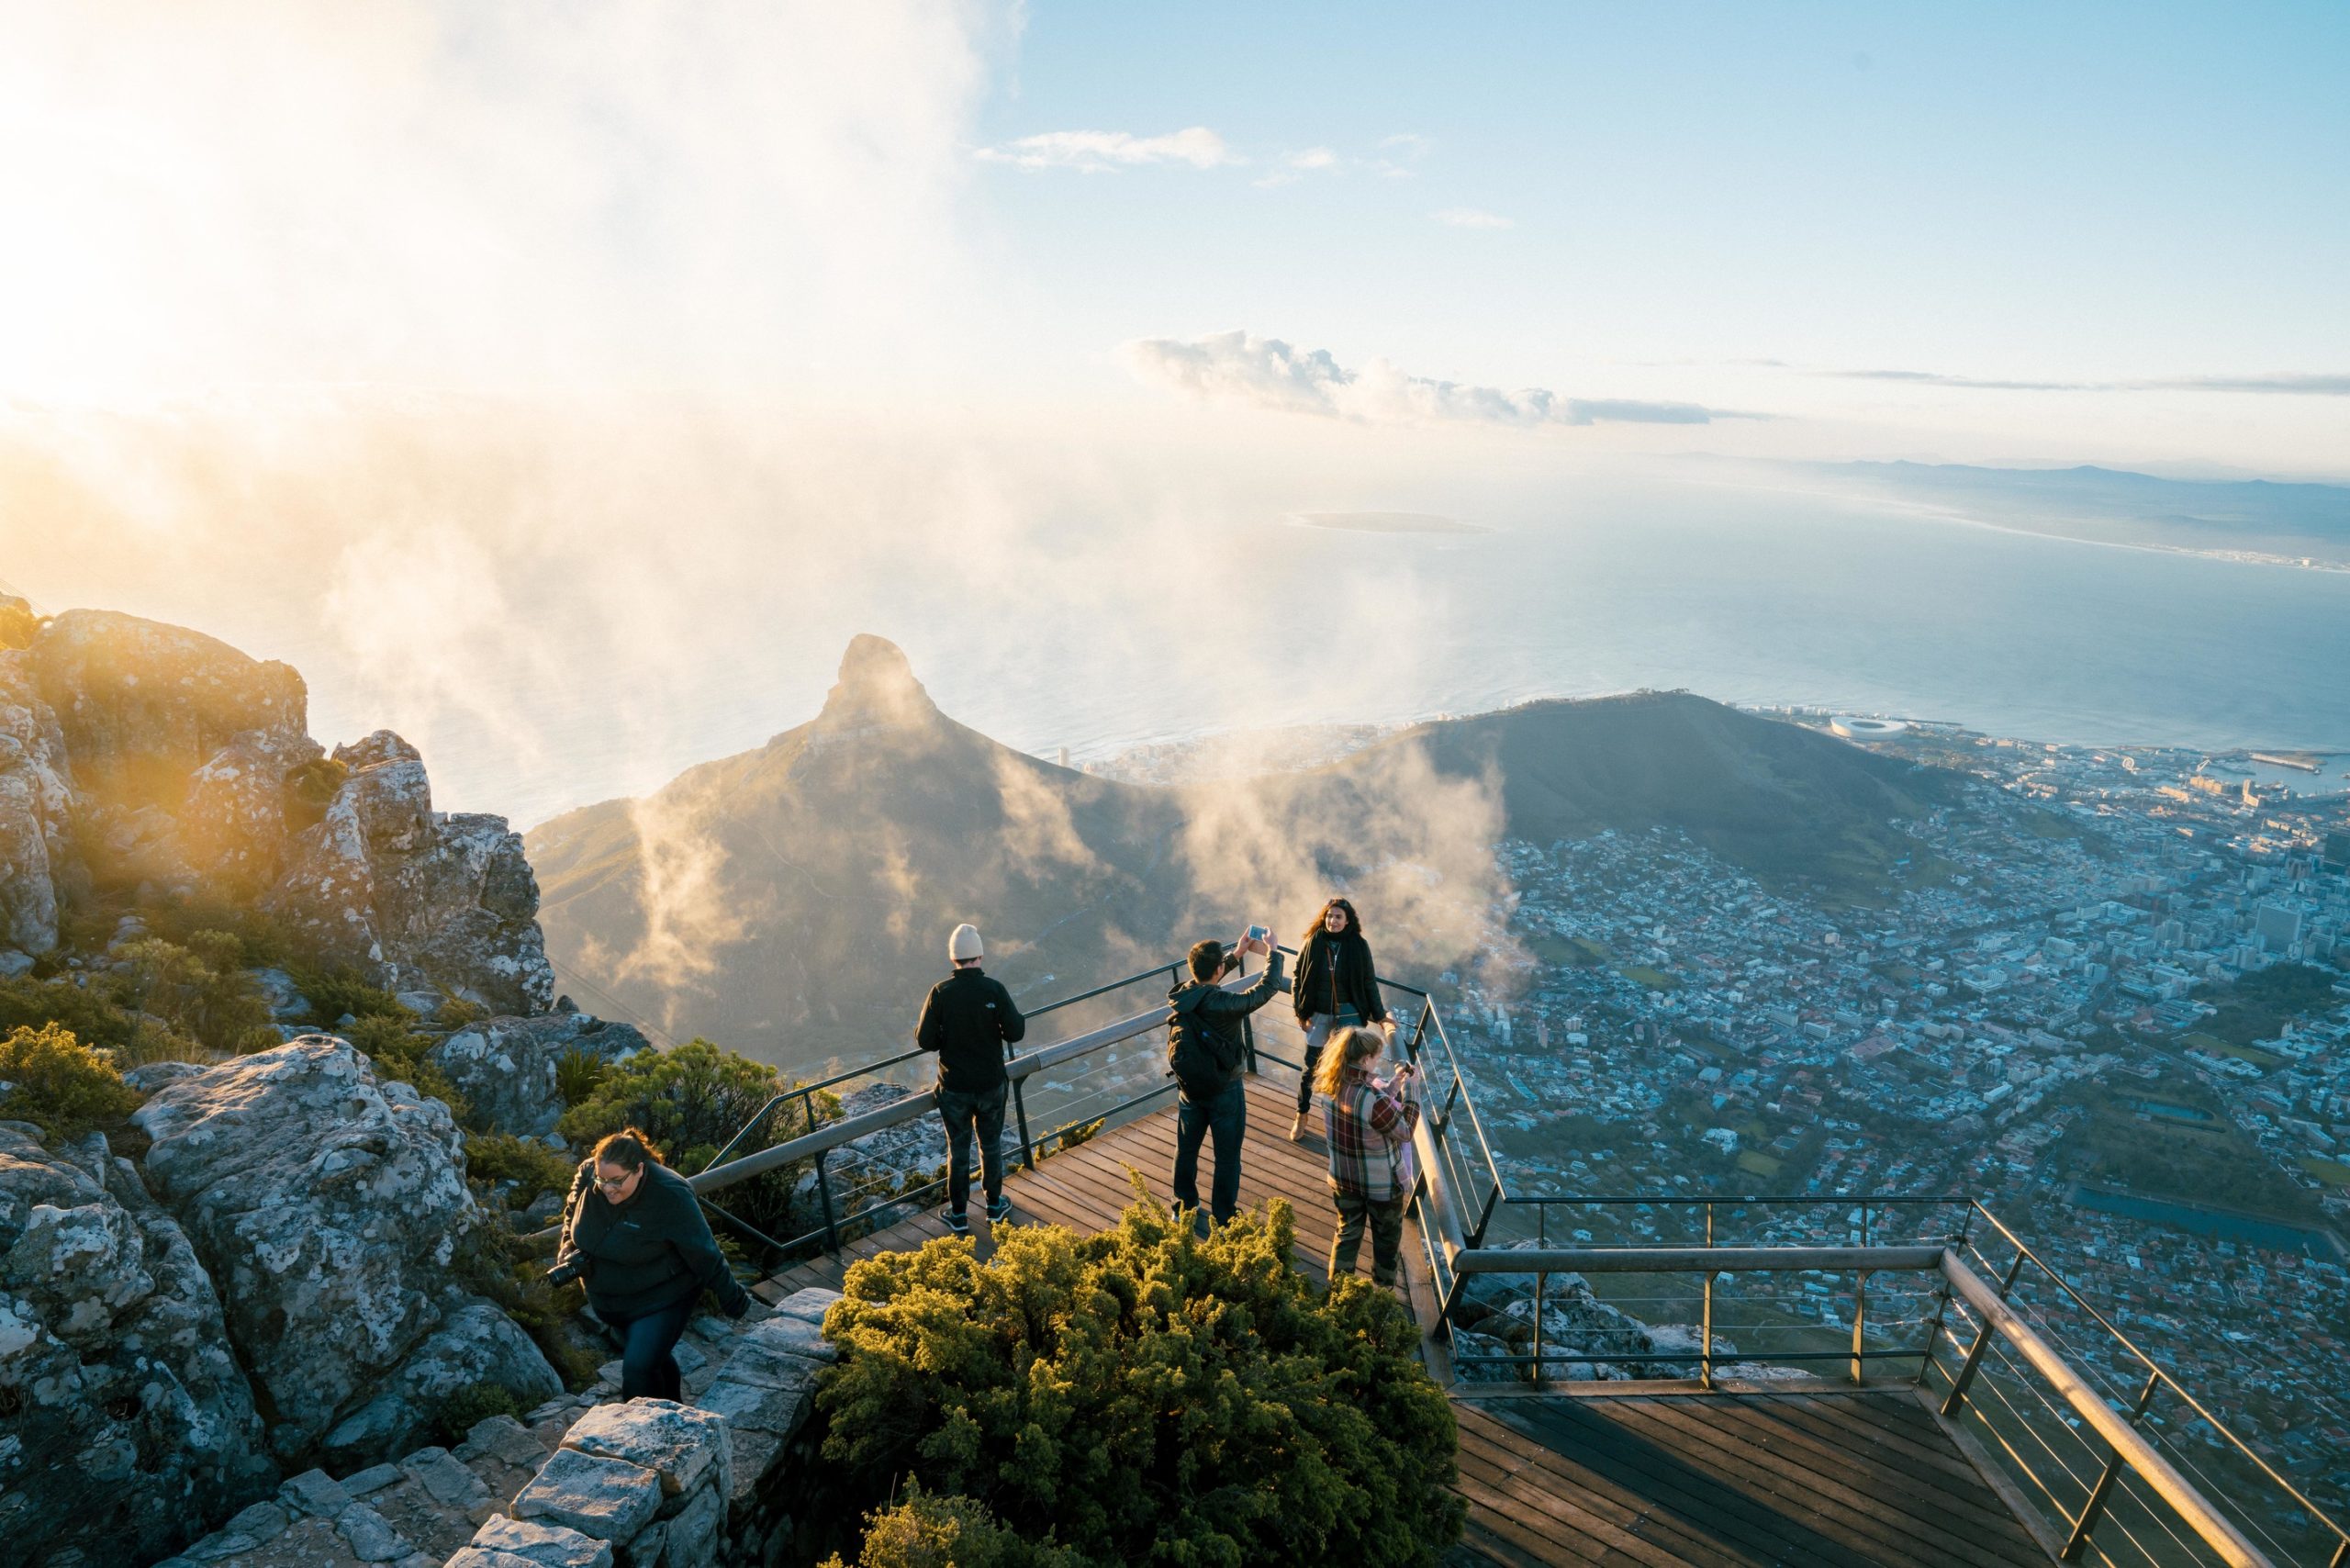 travelers pose for selfies at Table Mountain in Cape Town, South Africa